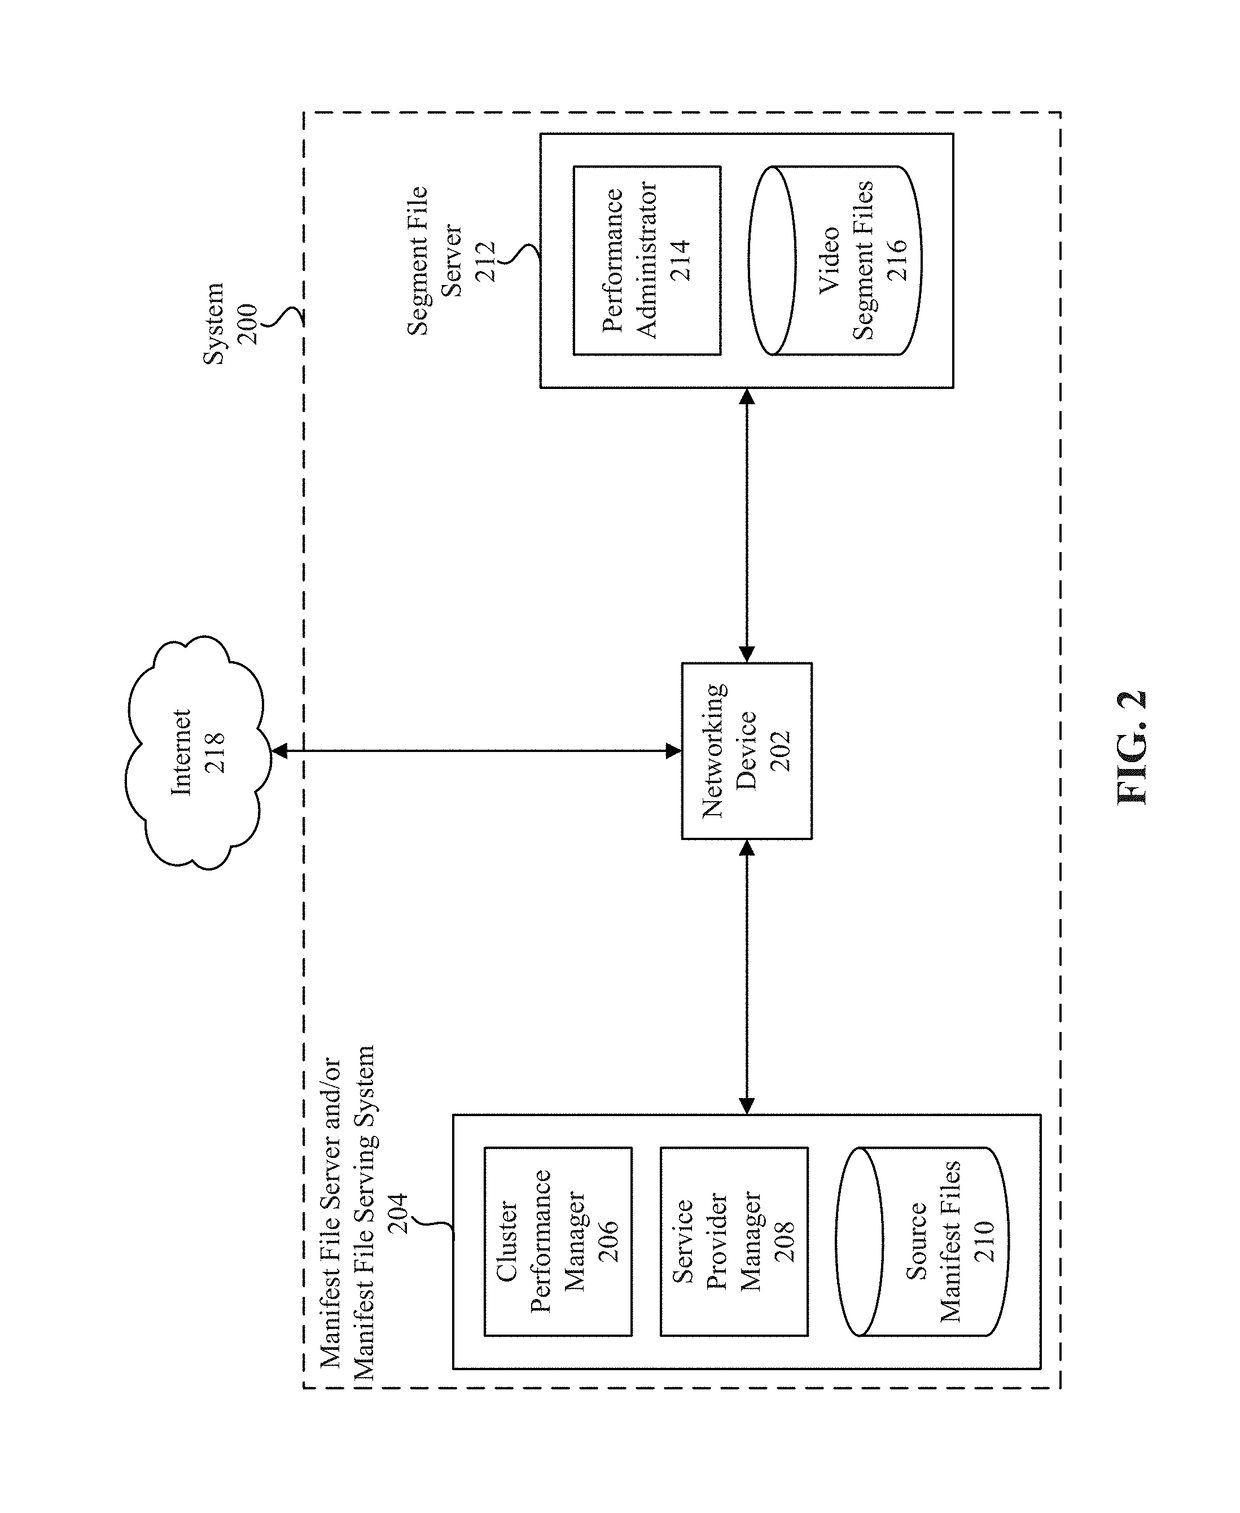 Determining manifest file data used in adaptive streaming video delivery